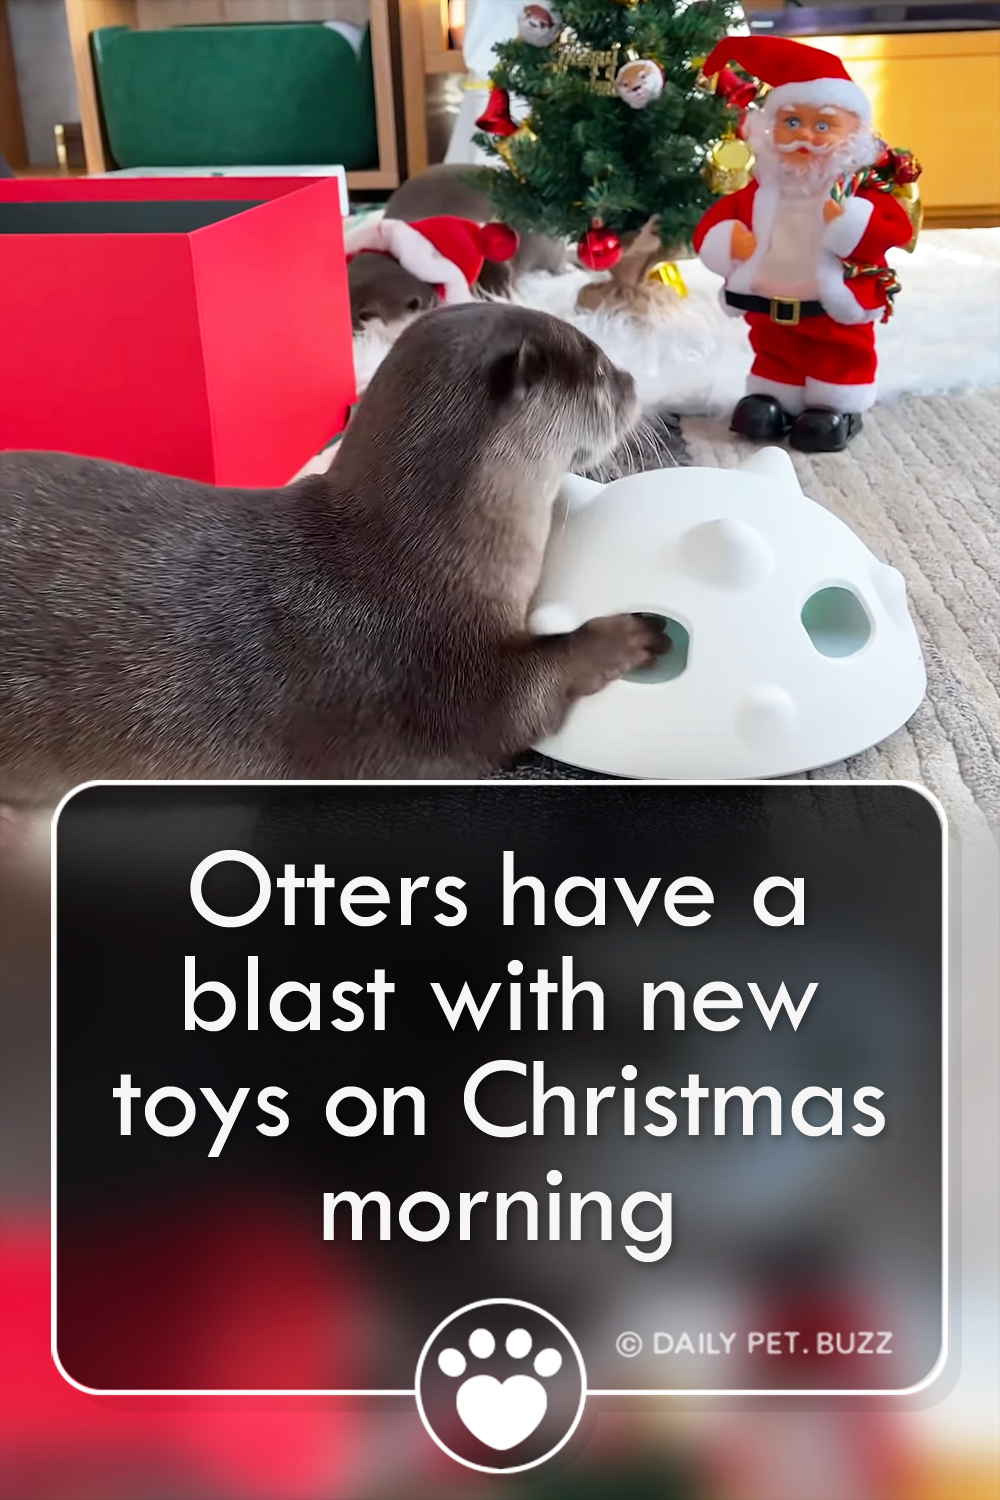 Otters have a blast with new toys on Christmas morning